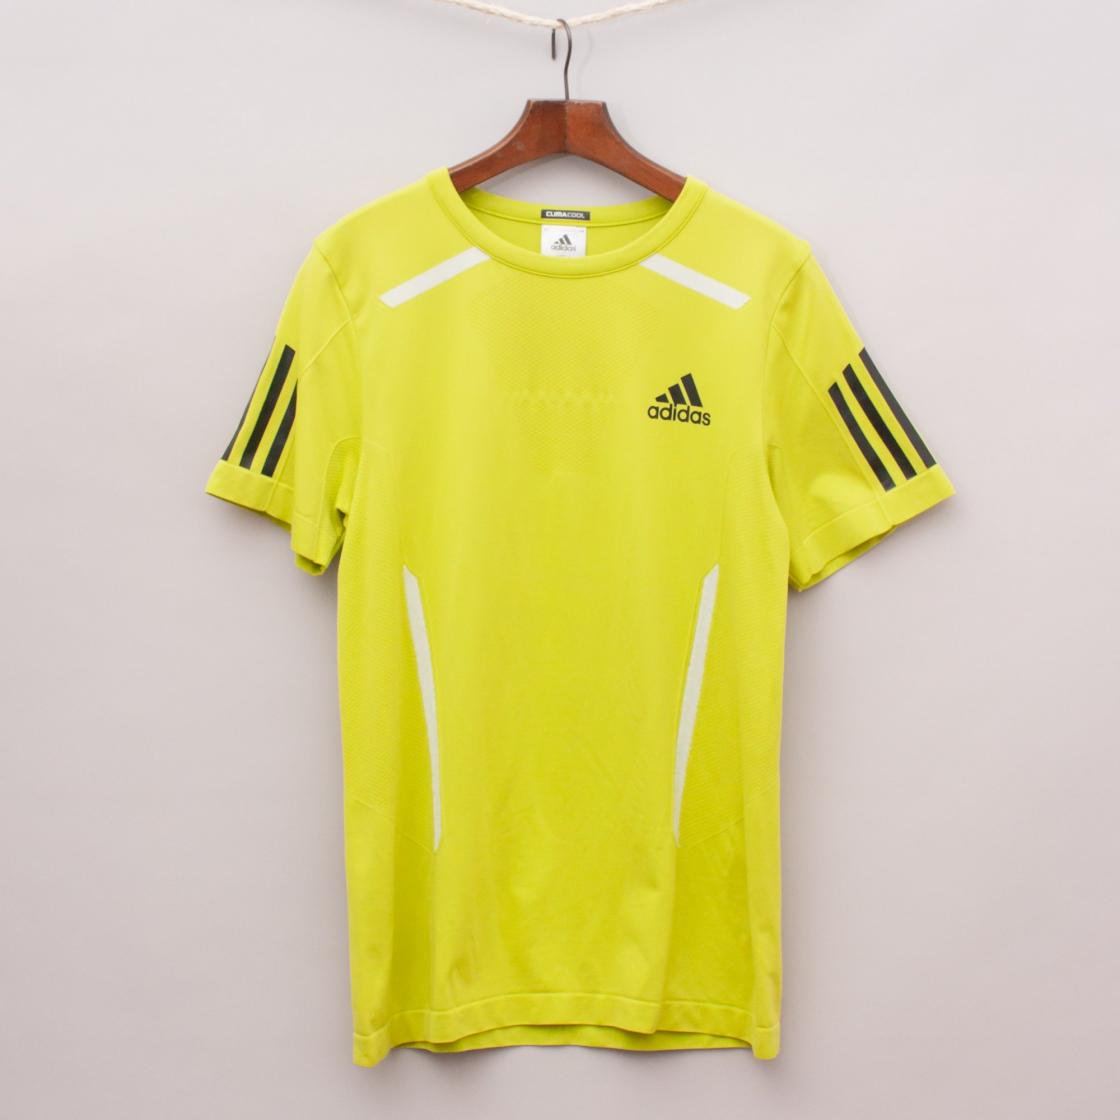 Adidas Lime Yellow Sports Jersey (Reduced - WAS $20)